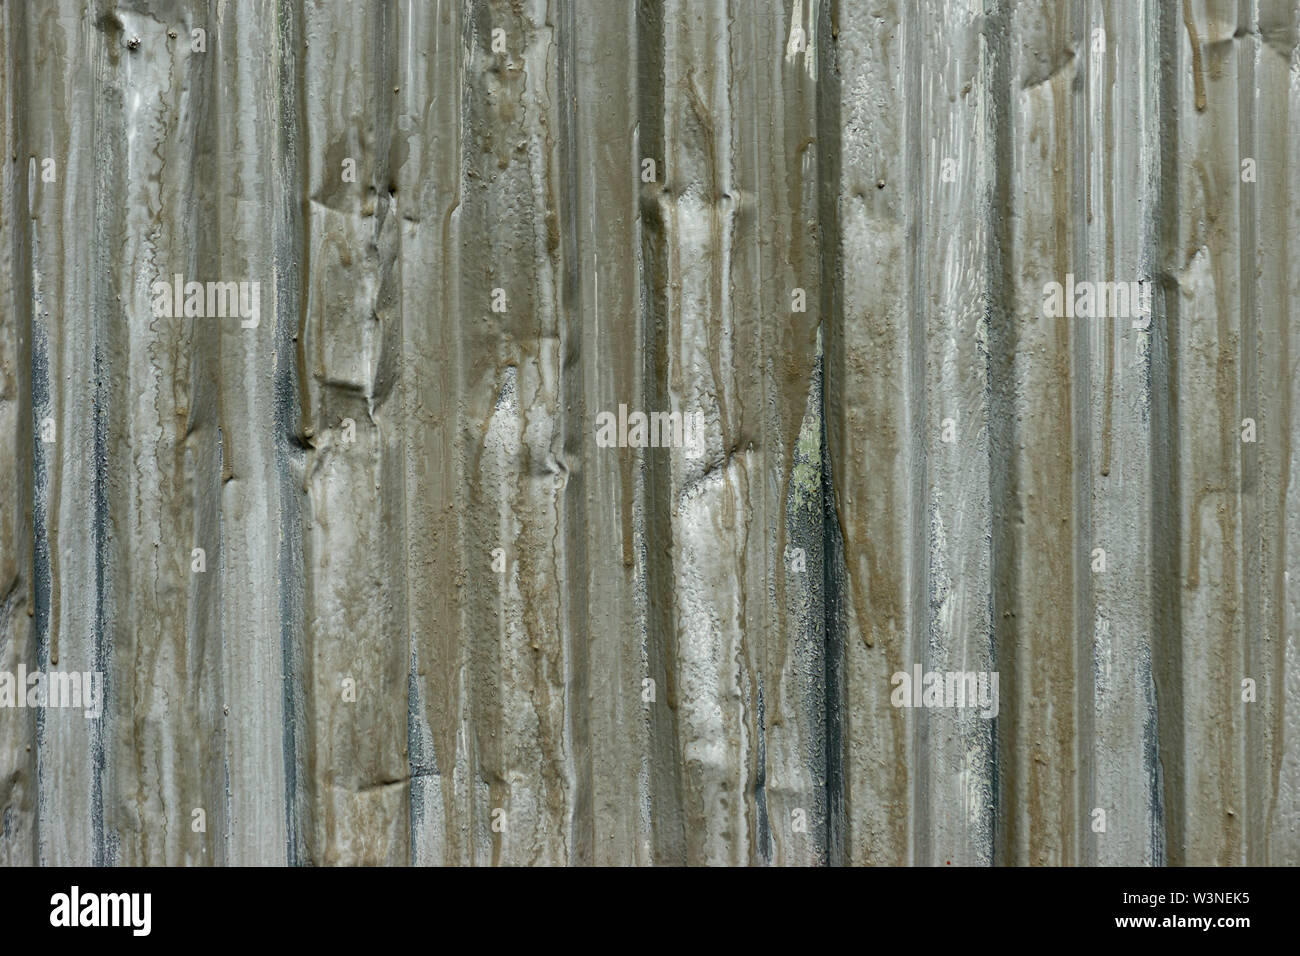 The corrugated metal surface of grey color with runs of old paint. Texture or background for a project Stock Photo